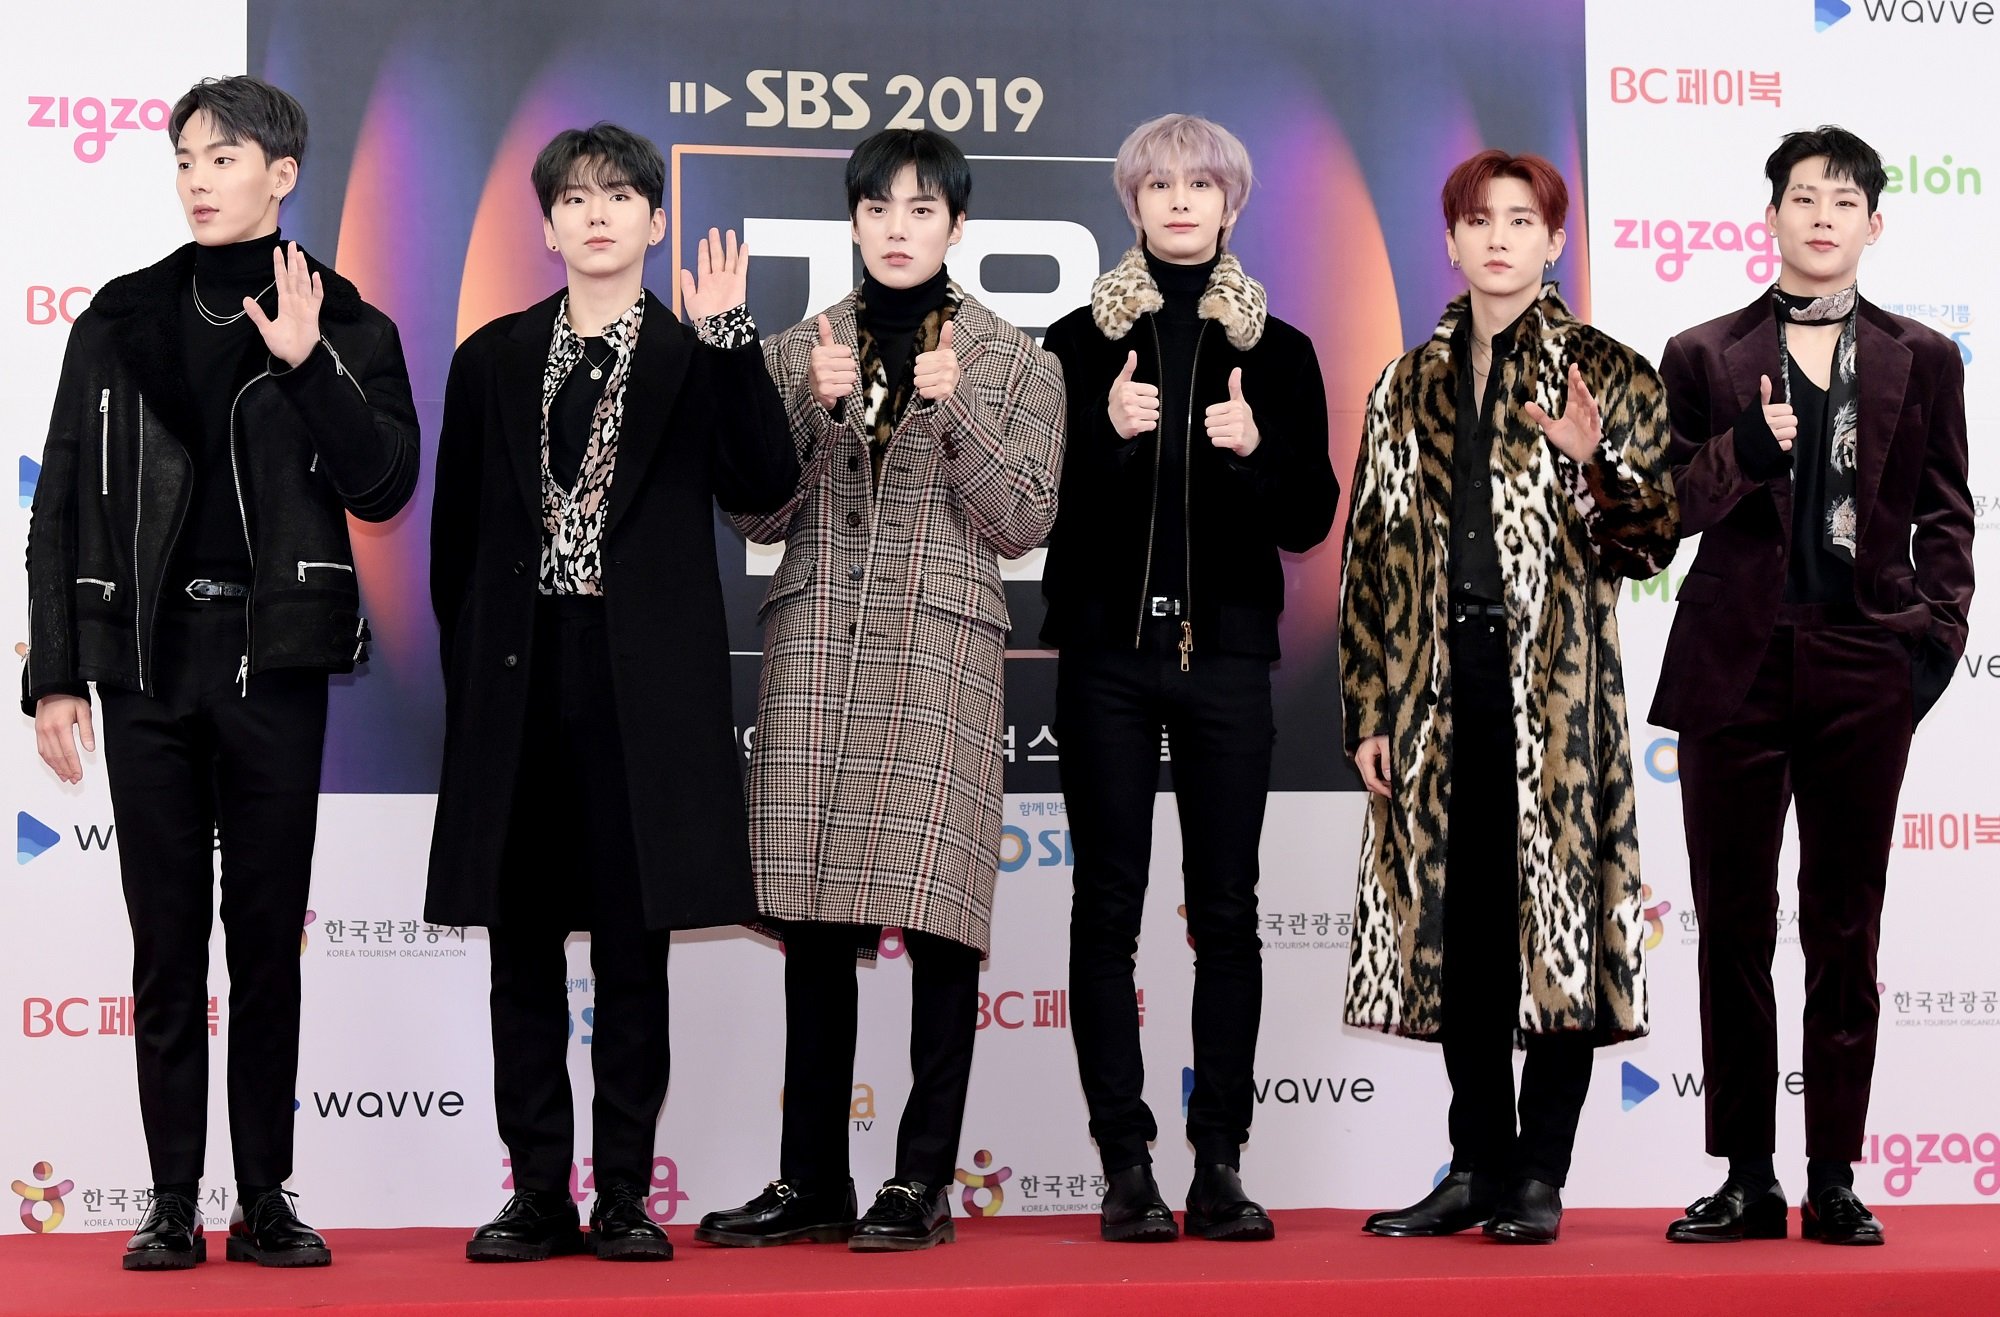 Monsta X attend the 2019 SBS Gayo Daejeon Photocall